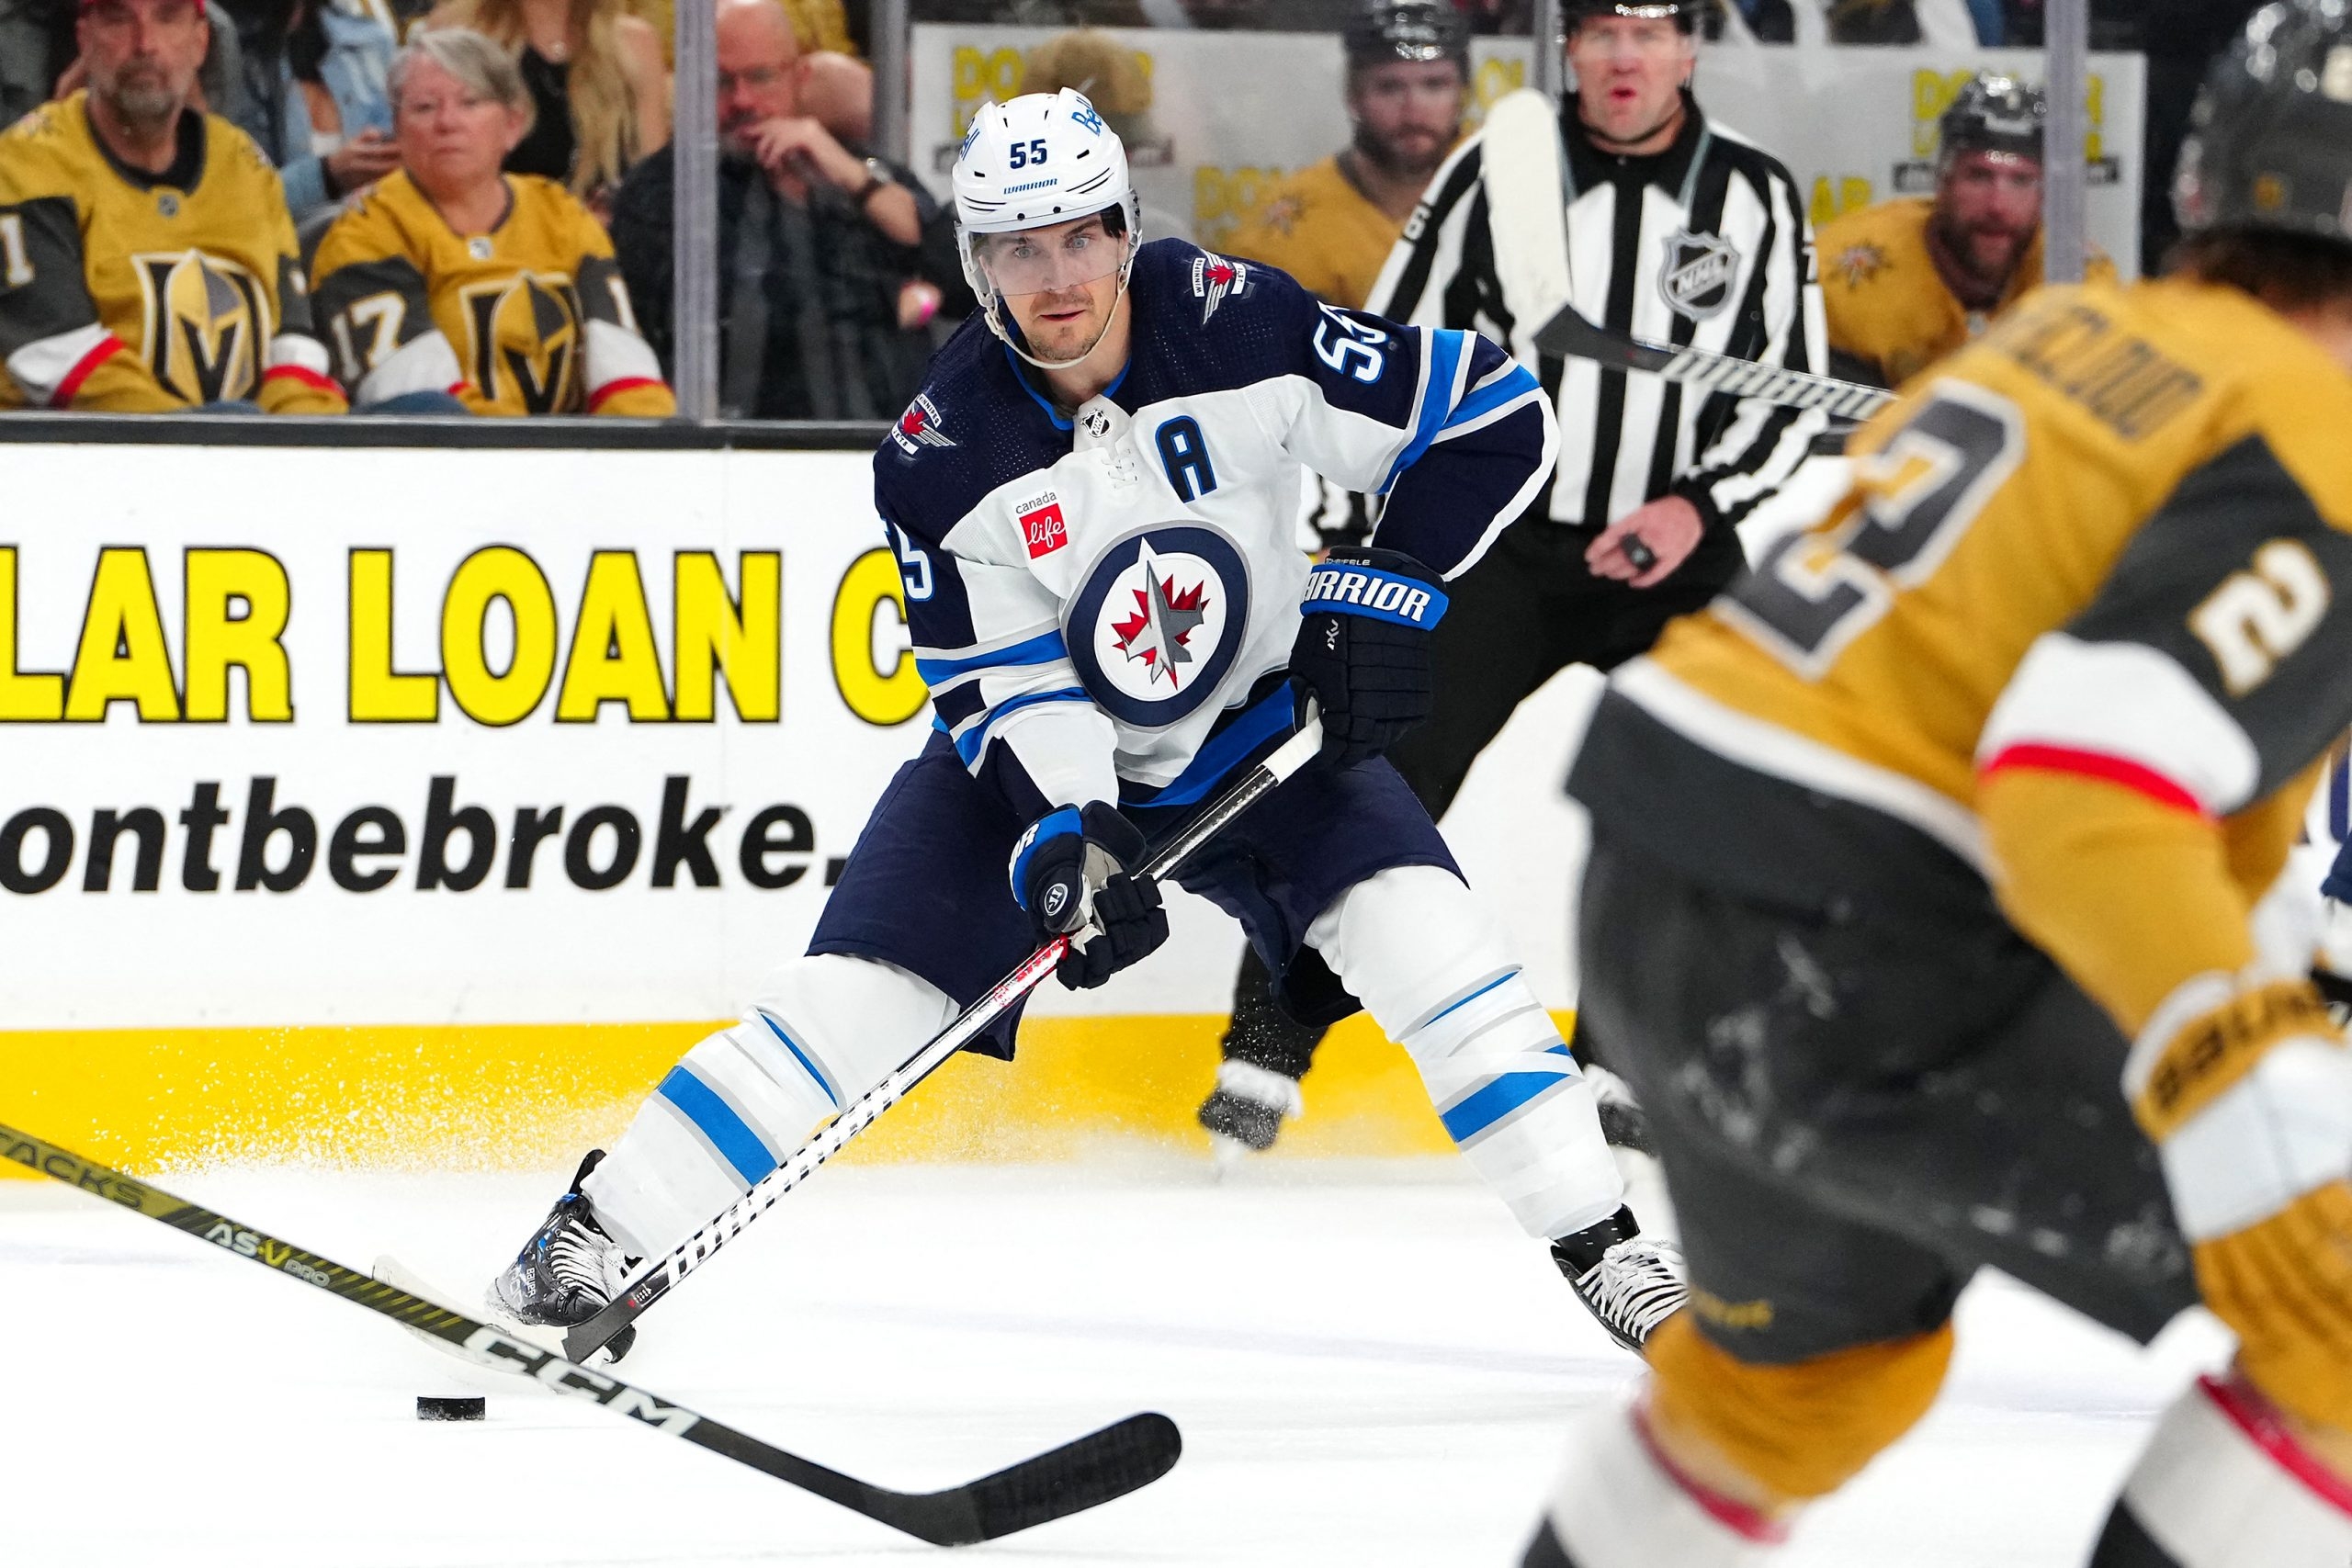 Winnipeg Jets centre Mark Scheifele finished Game 2 with a minus-3 rating and had no points.